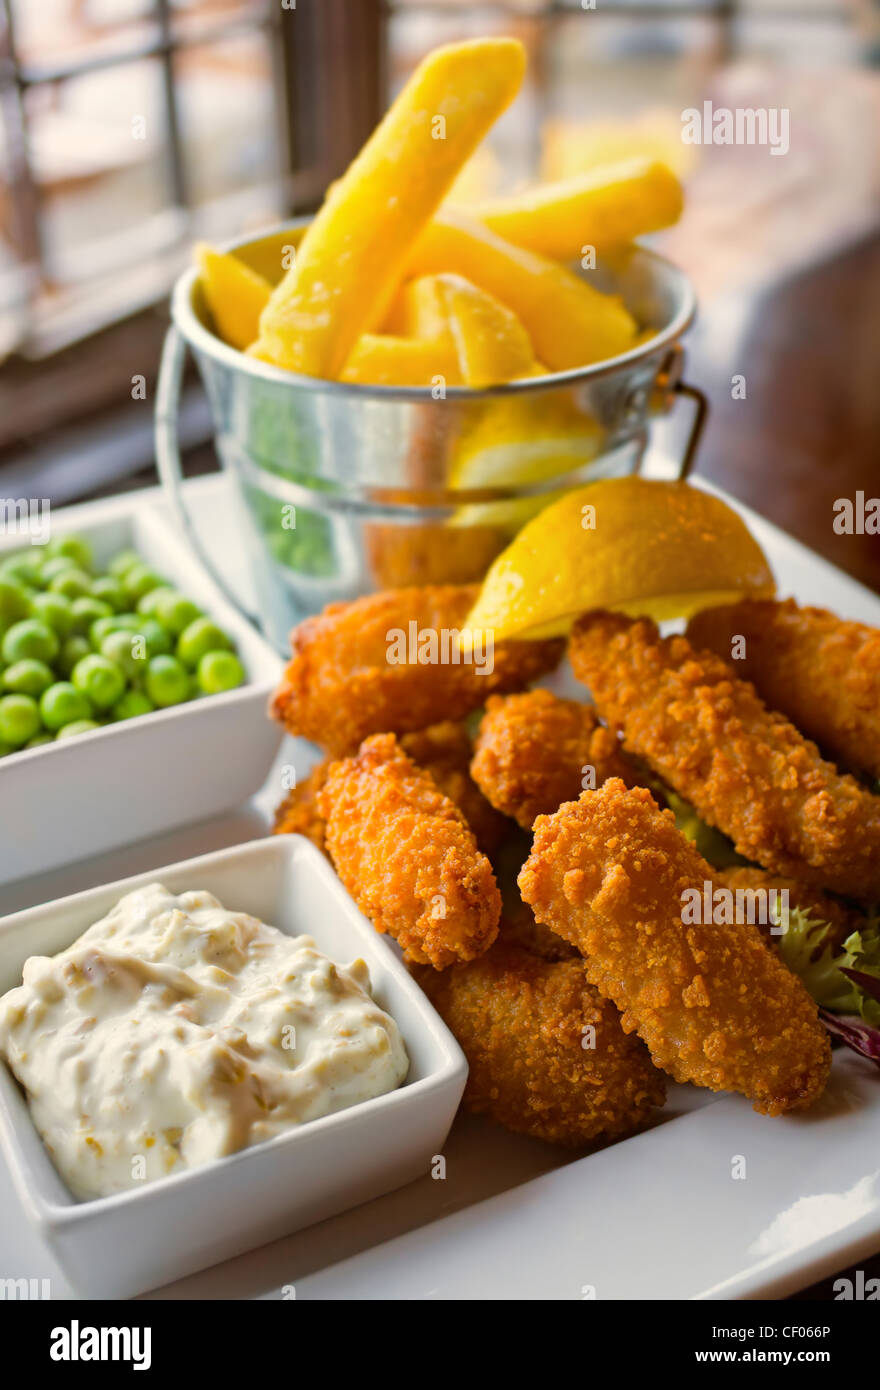 Fresh Scampi and chips pub meal Stock Photo - Alamy